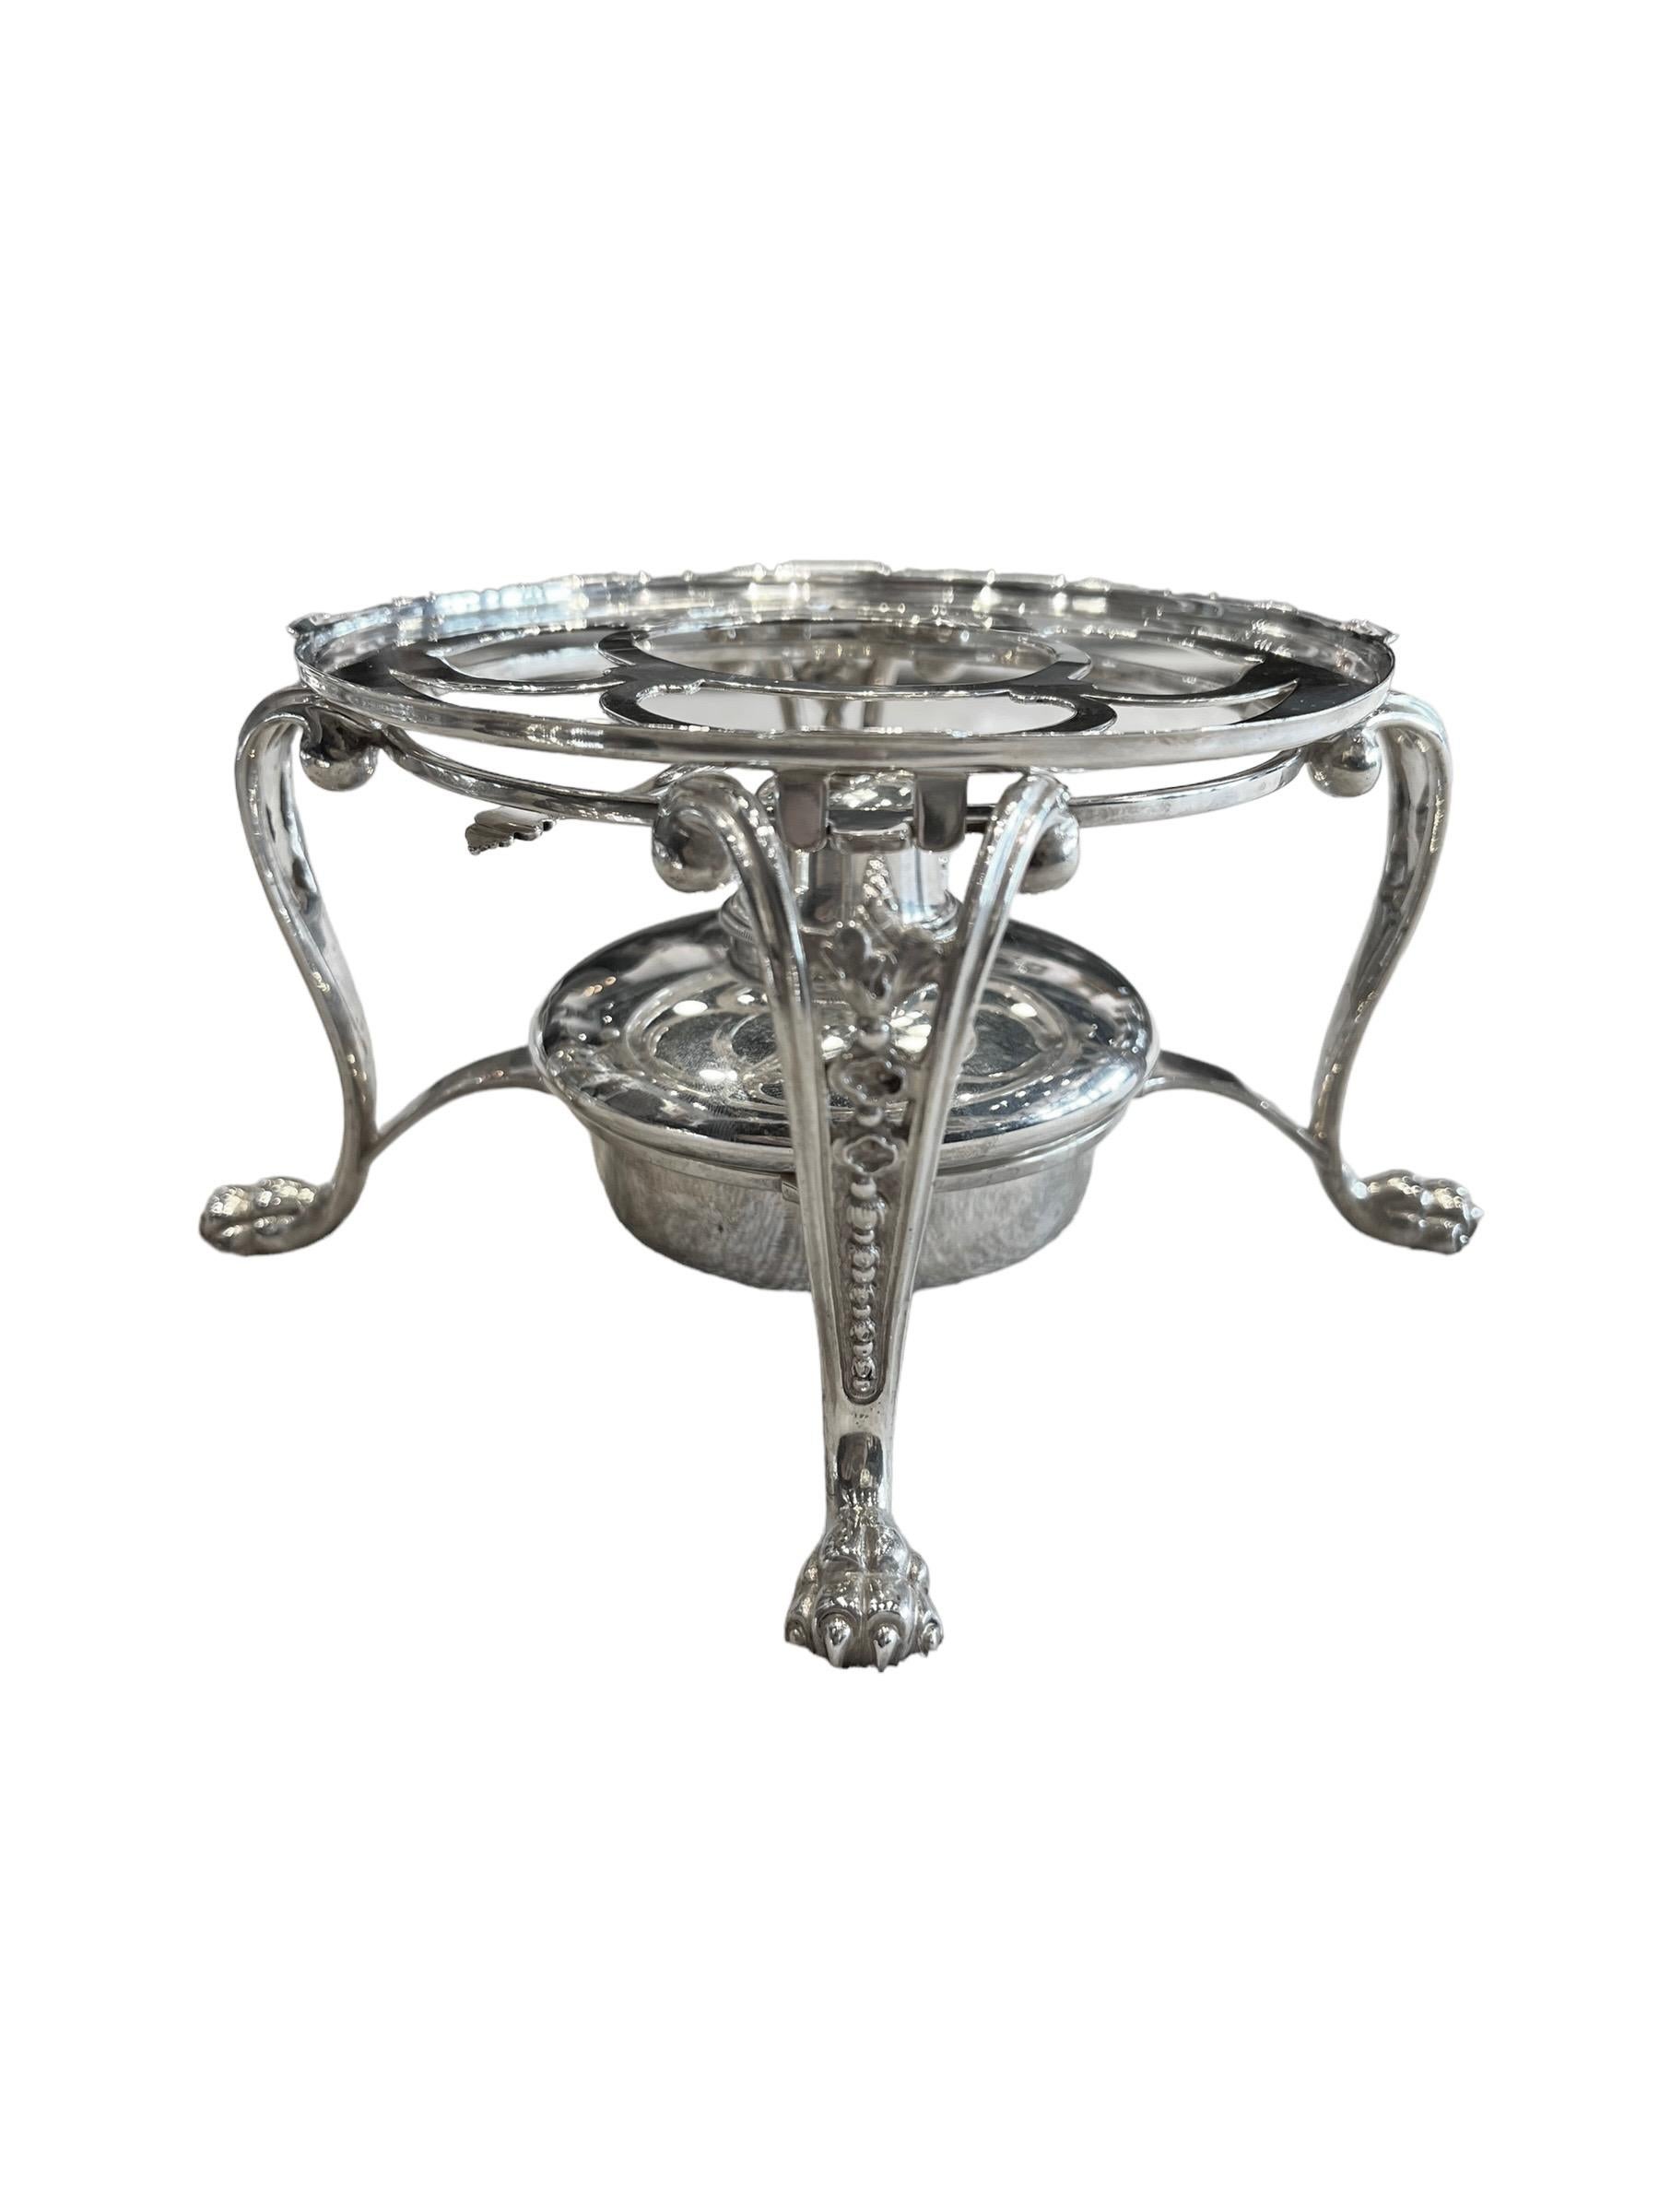 Tiffany and Co Sterling Silver Chafing Dish with Warmer, 19th Century For Sale 2